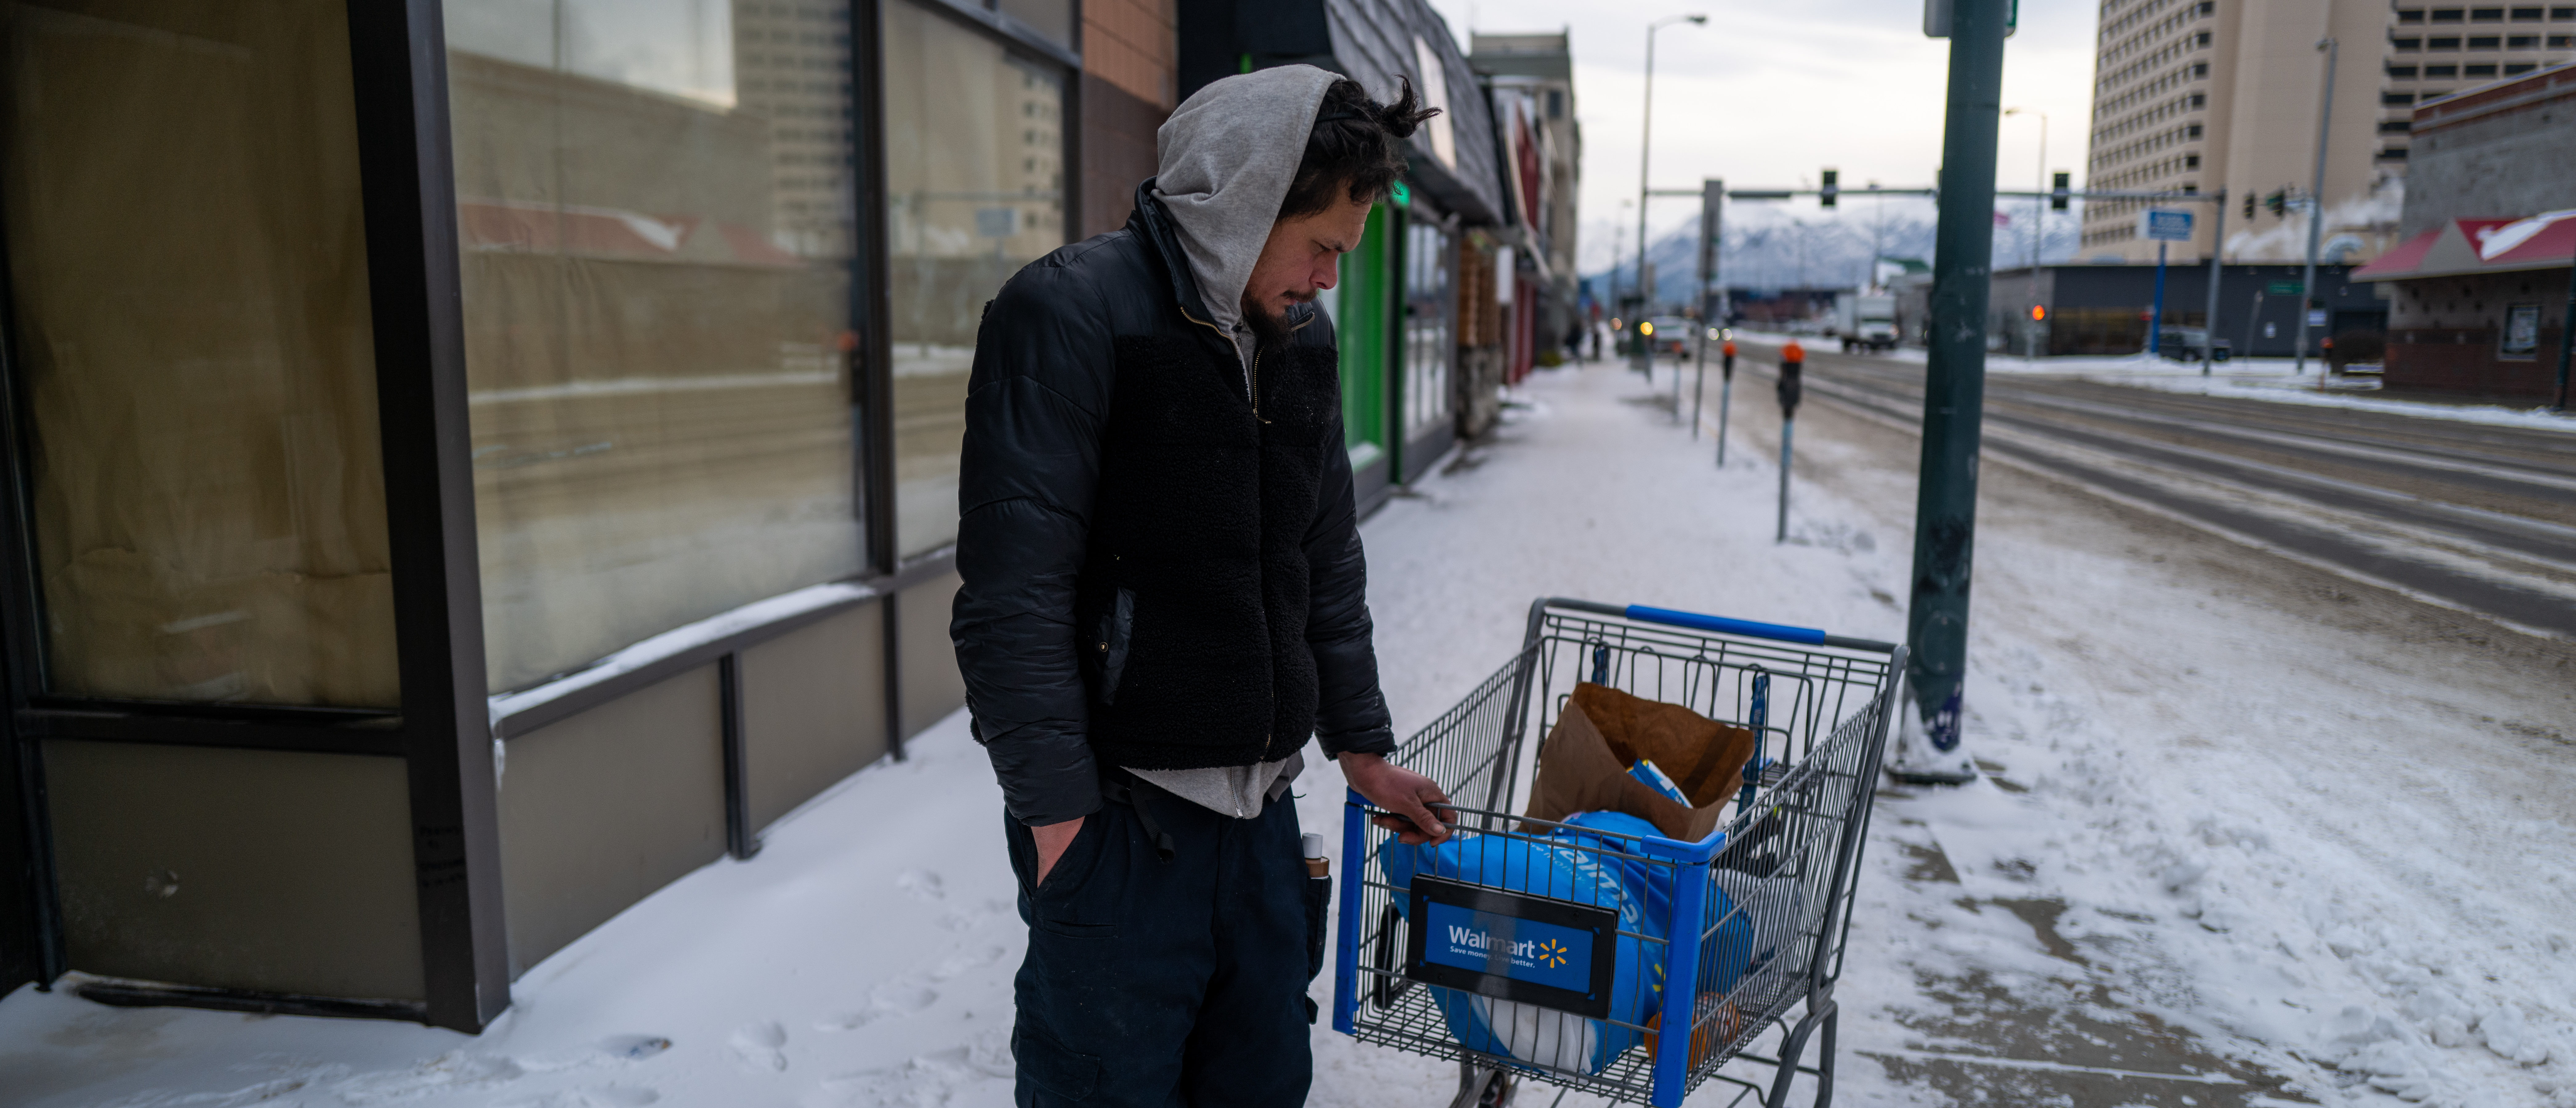 ANCHORAGE, ALASKA - NOVEMBER 07: A man pauses on a street downtown where homelessness is a chronic problem, on November 07, 2022 in Anchorage, Alaska.